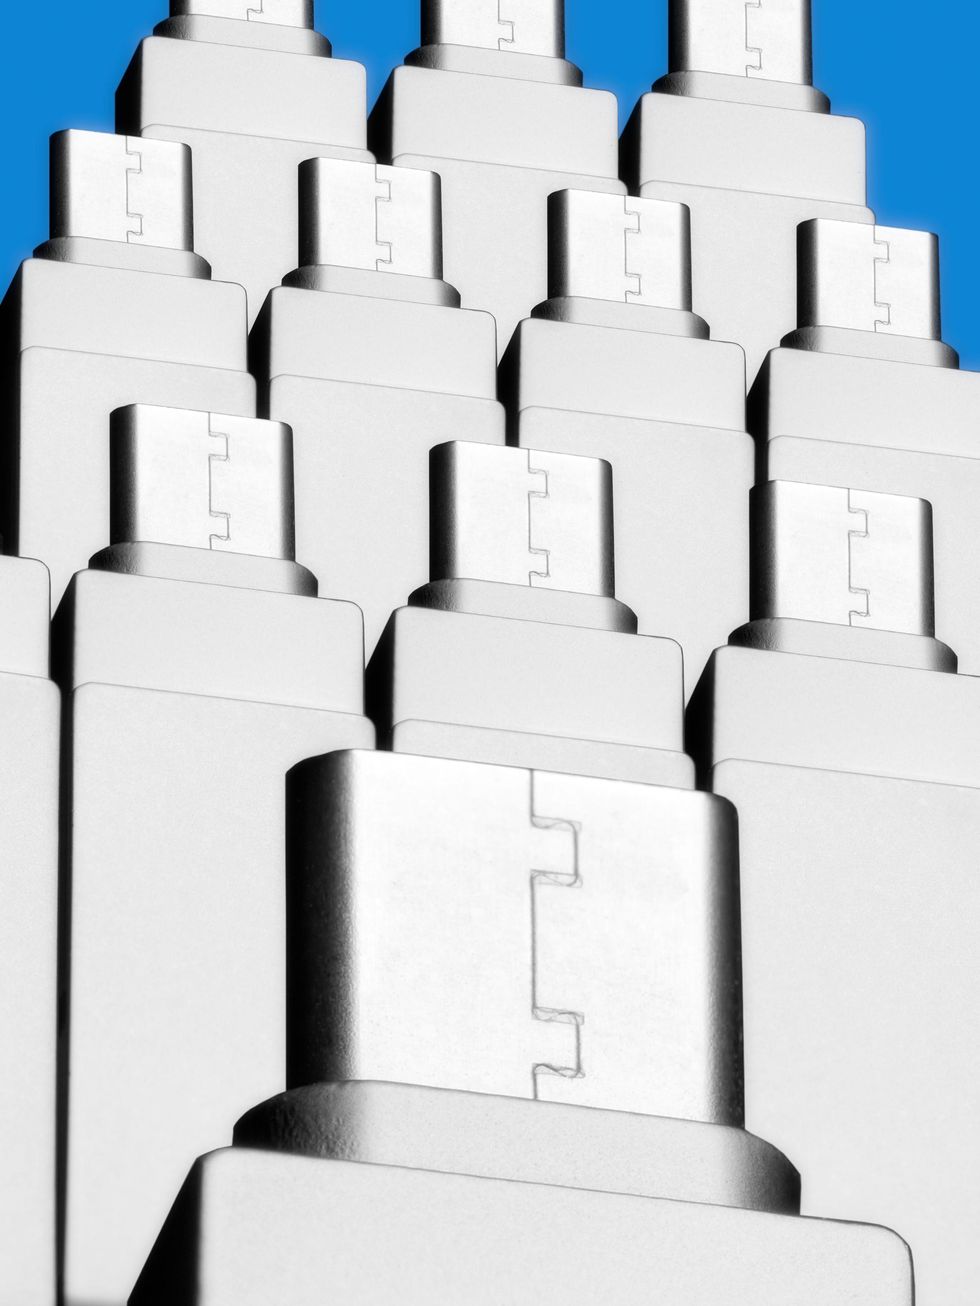 Thumbdrives photographed from below to look like a collection of skyscrapers. 